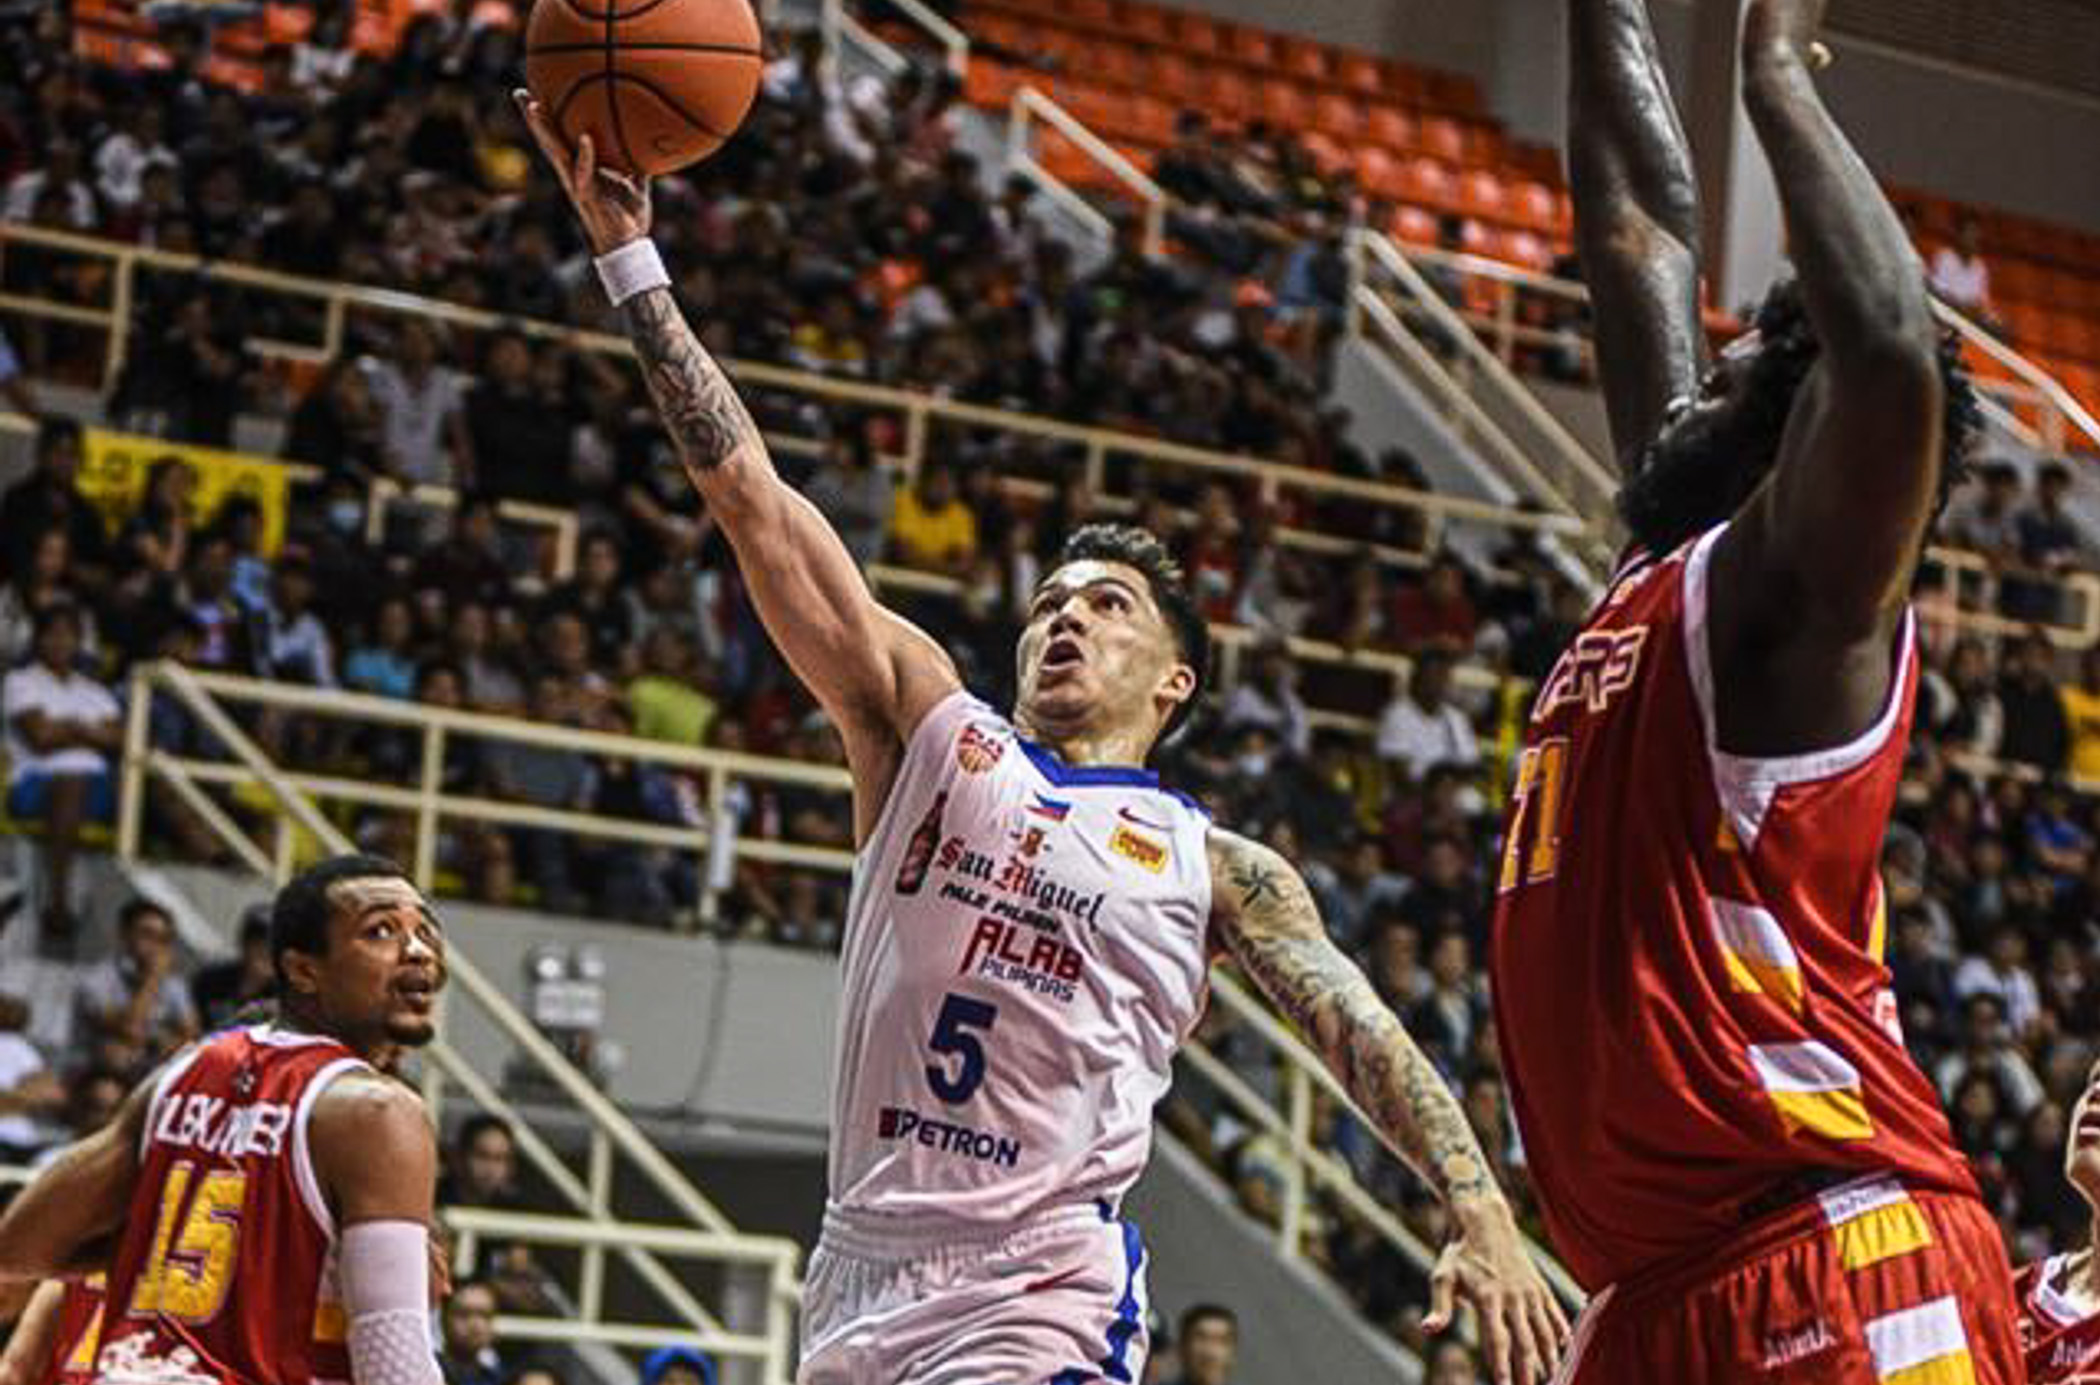 Alab Pilipinas survives another overtime game, stuns Slingers